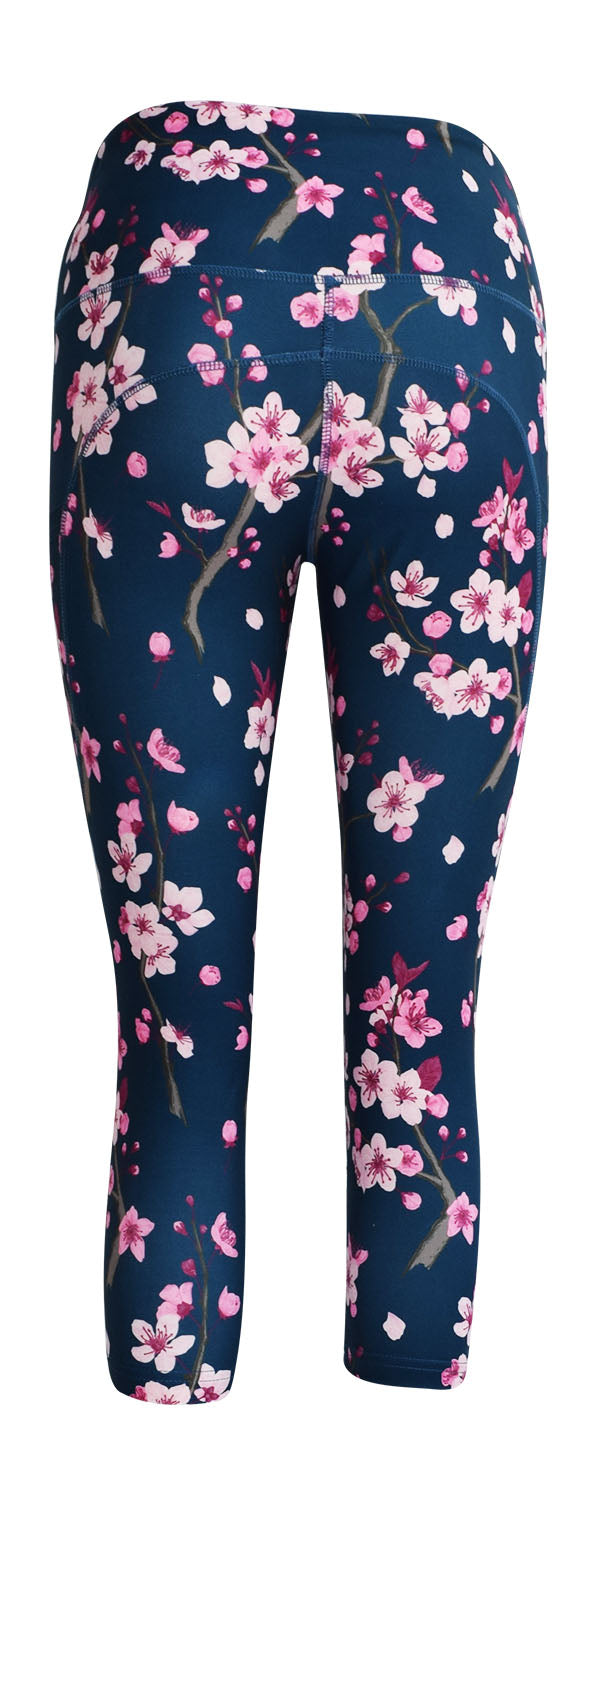 Zelocity Relaxed Cotton Top With High Rise Cotton Super Soft Leggings -  Cherry Blossom